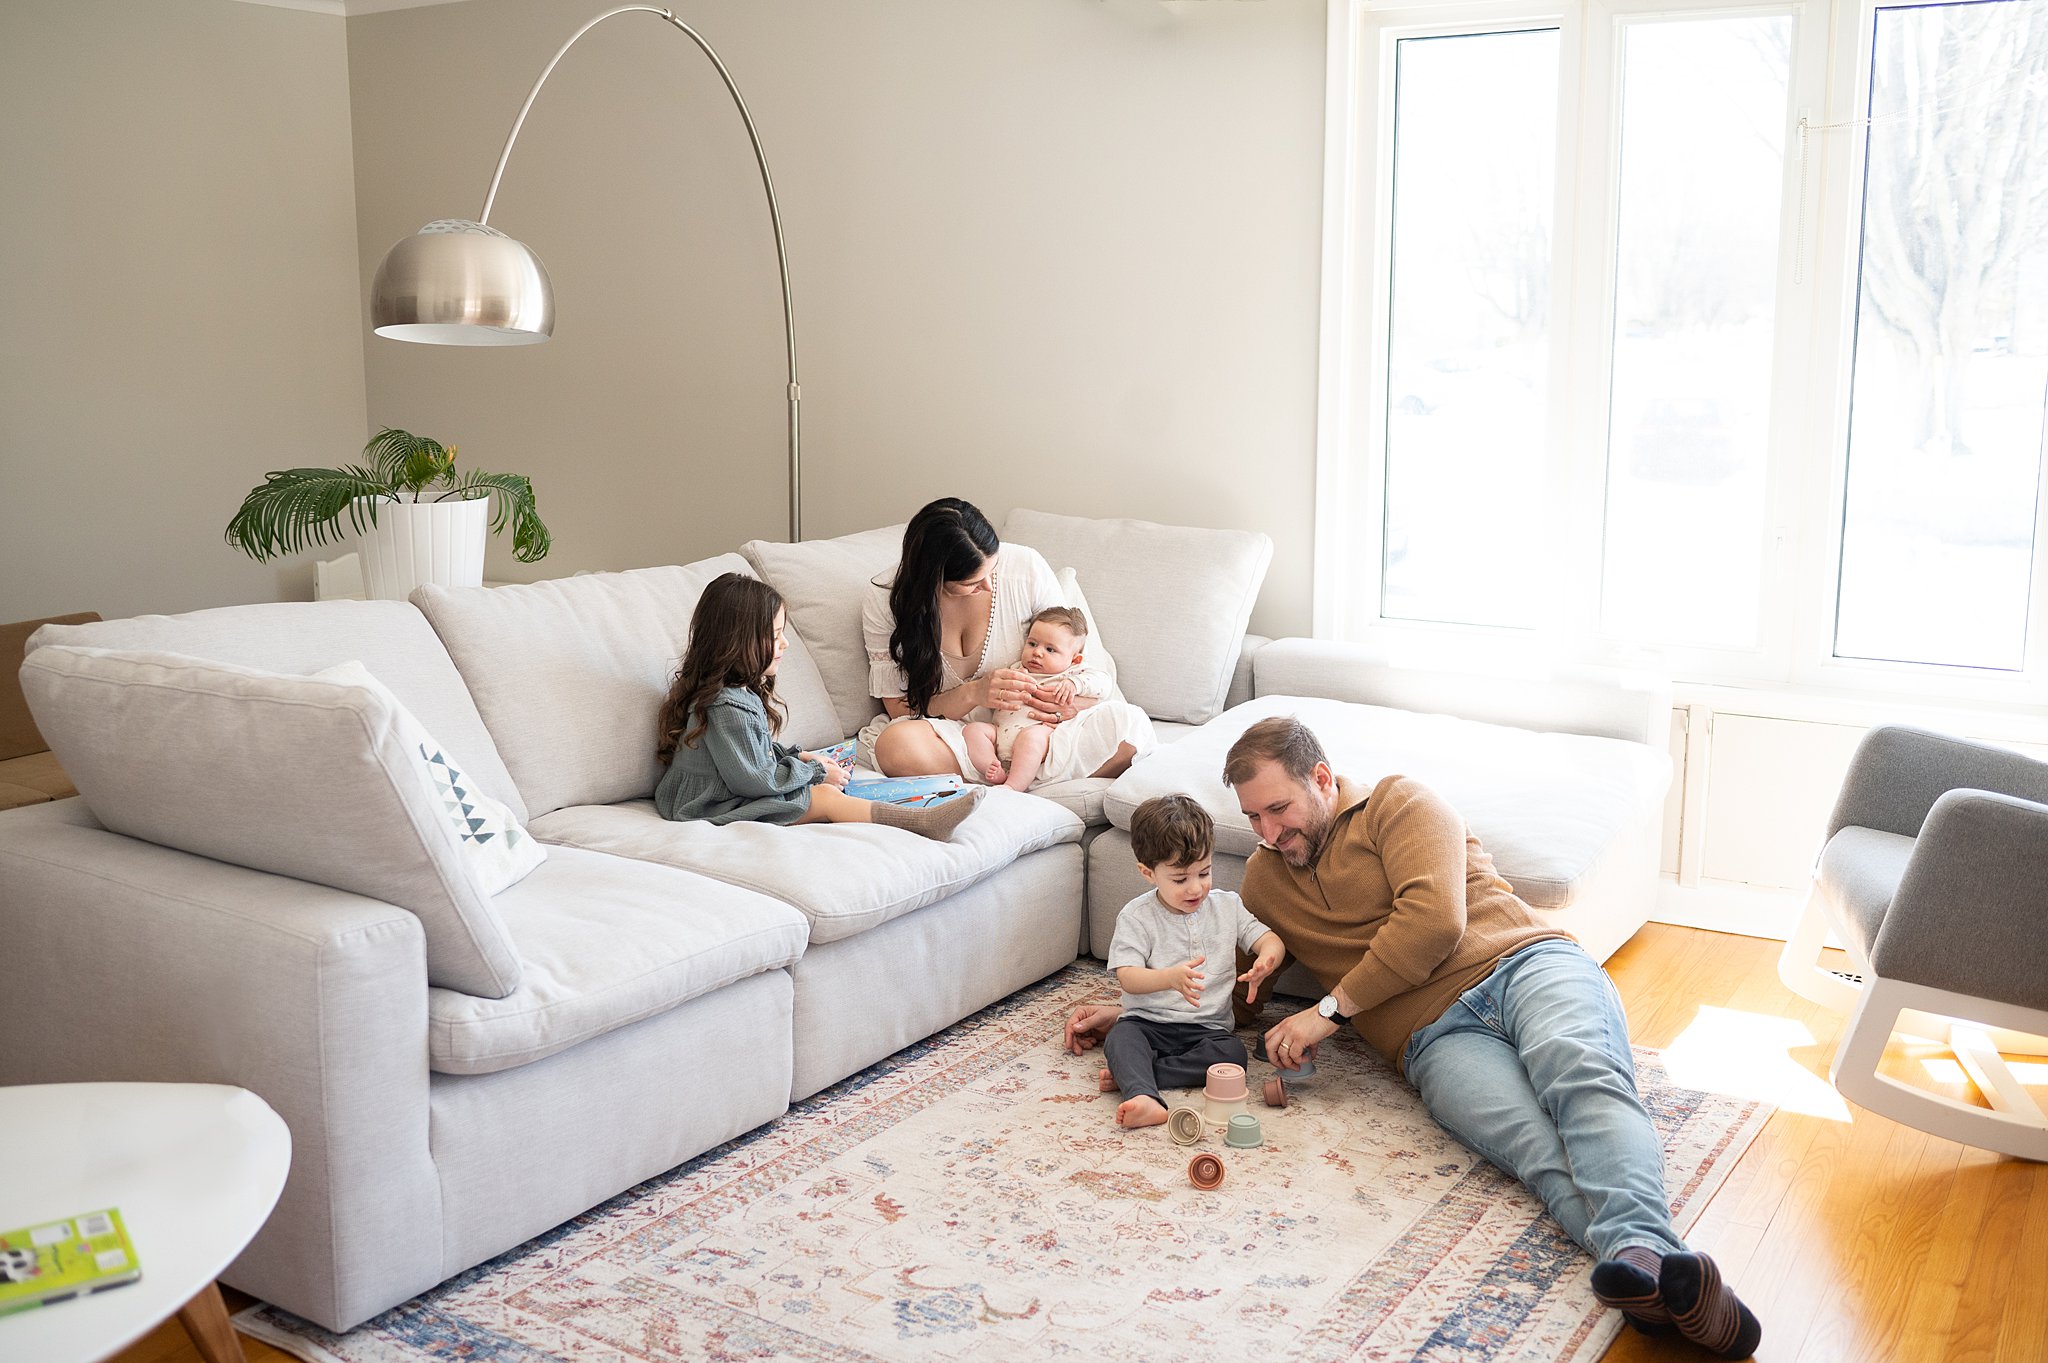 A mother sits on a couch playing with her newborn baby and toddler daughter while dad and another toddler boy play with some toys on the floor in front of them ottawa lactation consultants